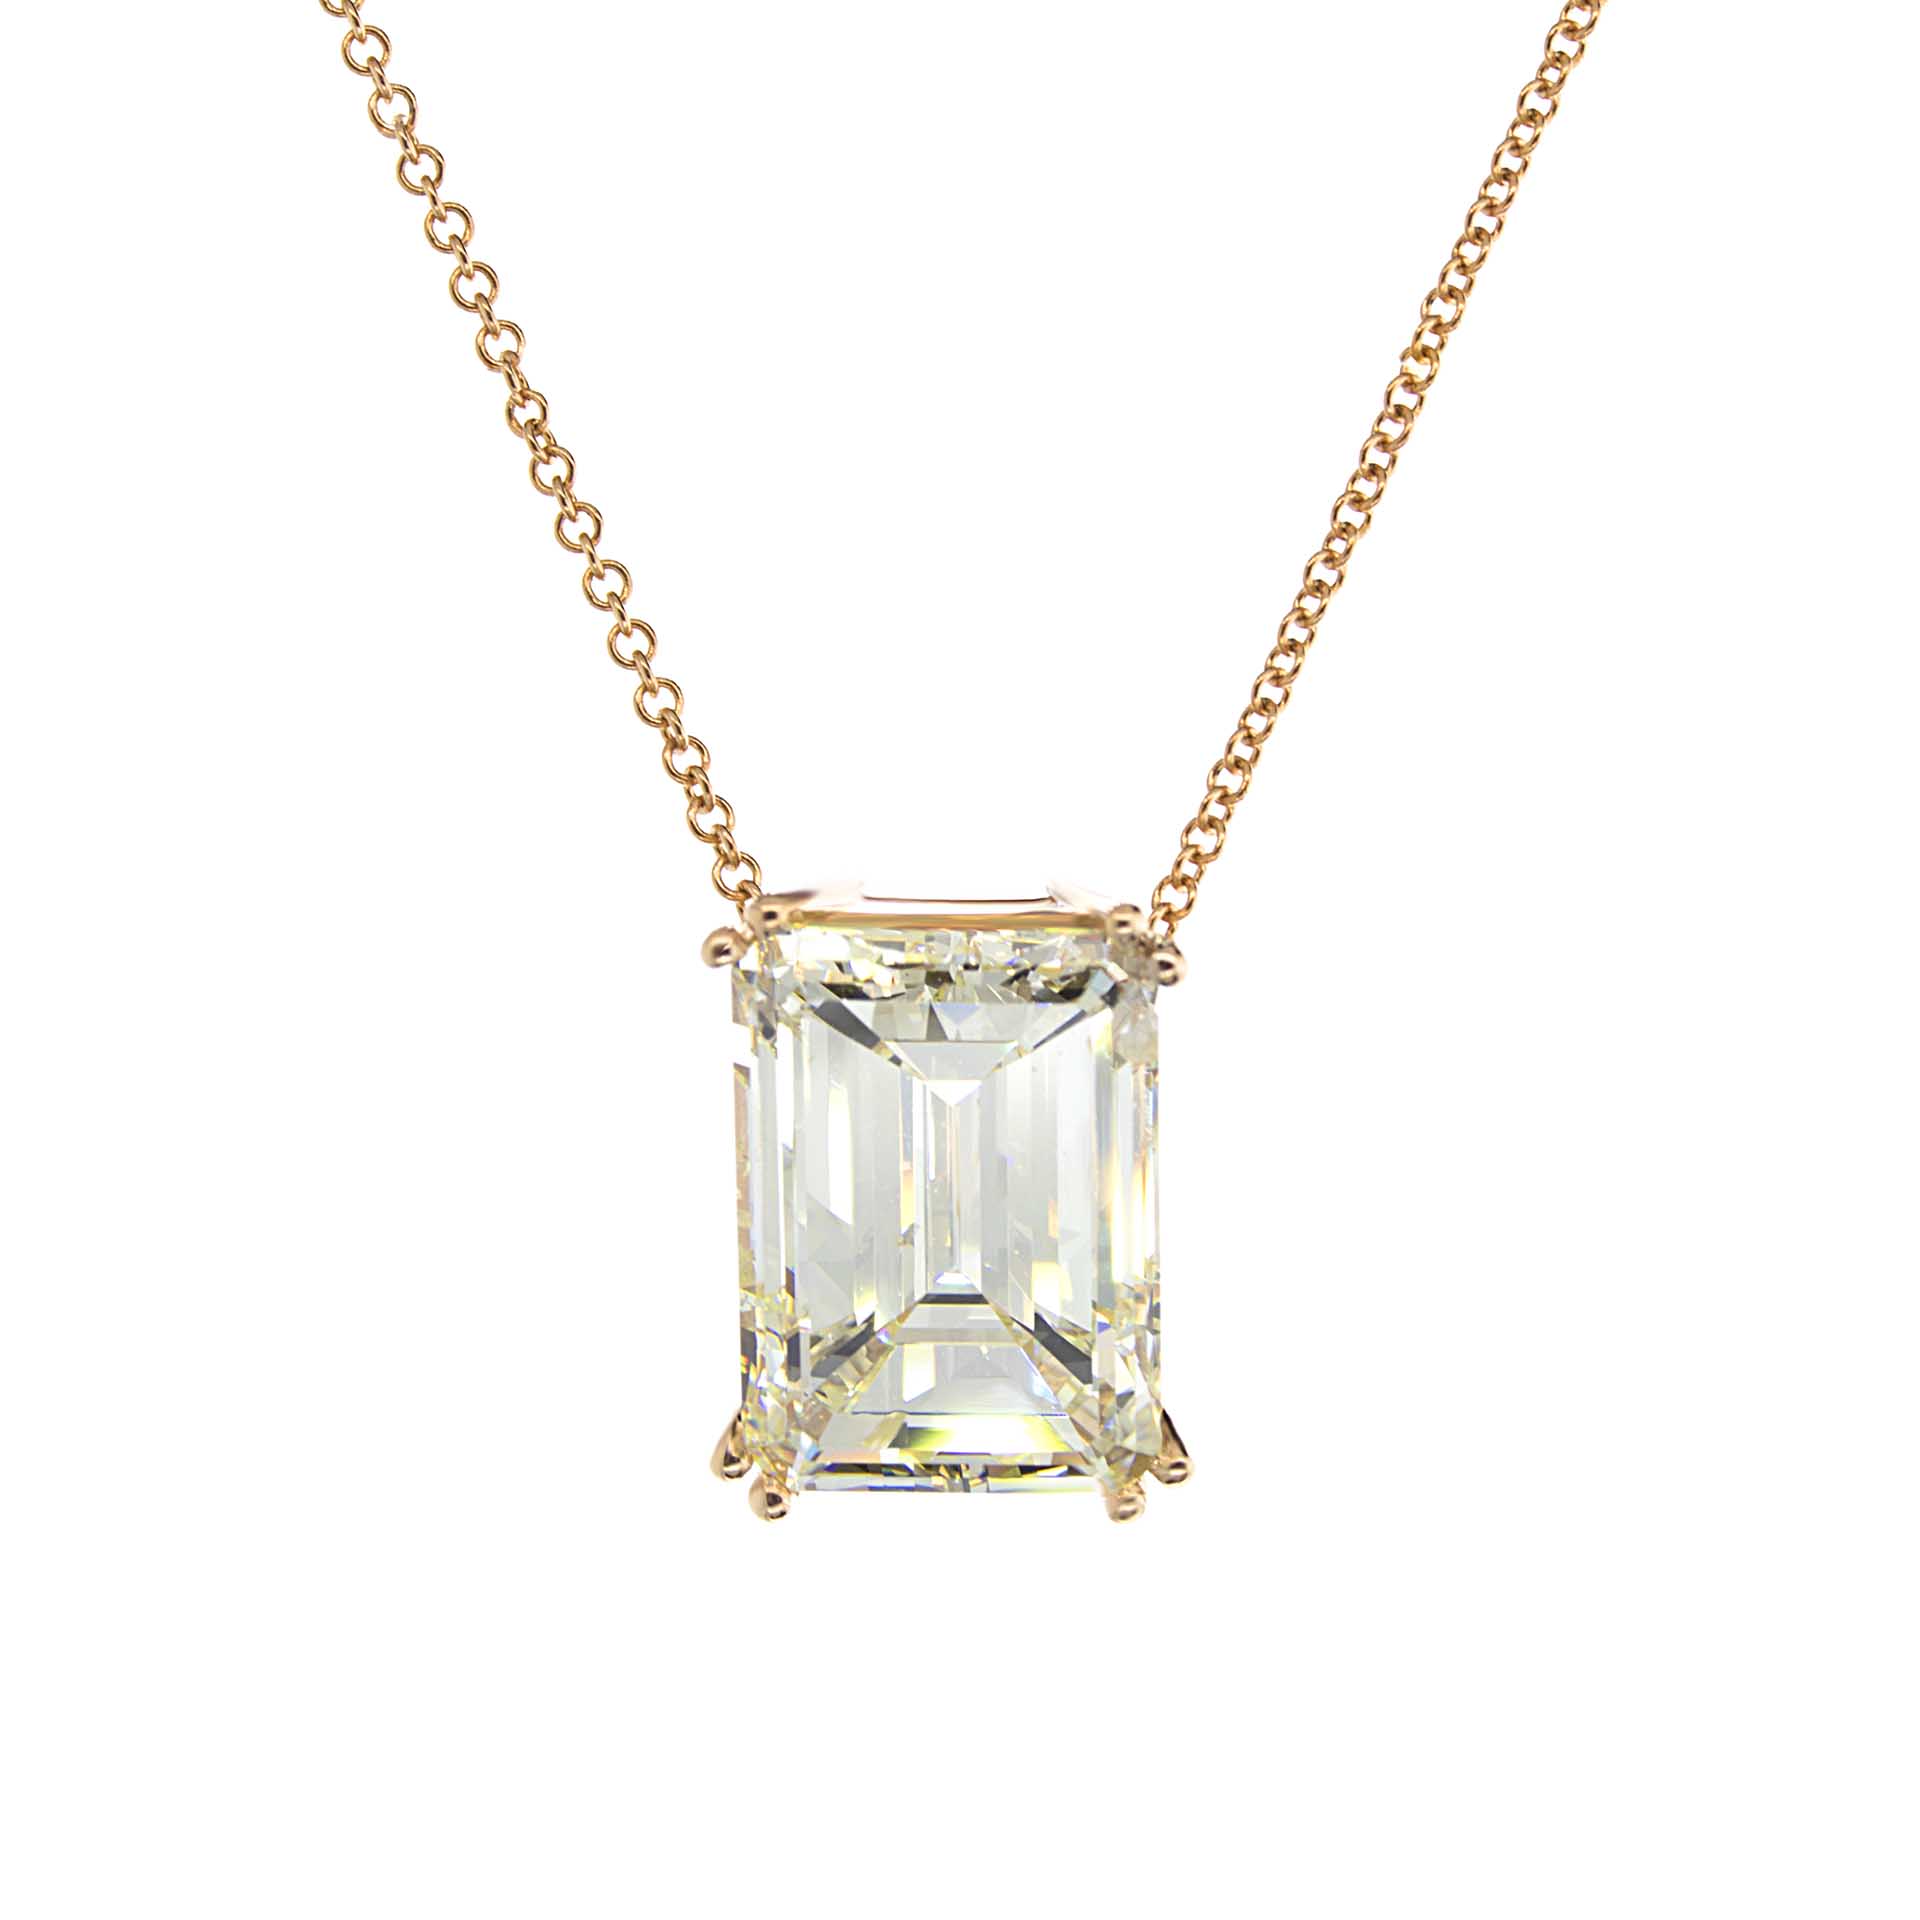 Buy Emerald Cut Diamond Necklace,moissanite Solitaire Cz Necklace,layered  Necklace,dainty Necklace,diamond Pendant,gold Necklace Bridesmaid Gift  Online in India - Etsy